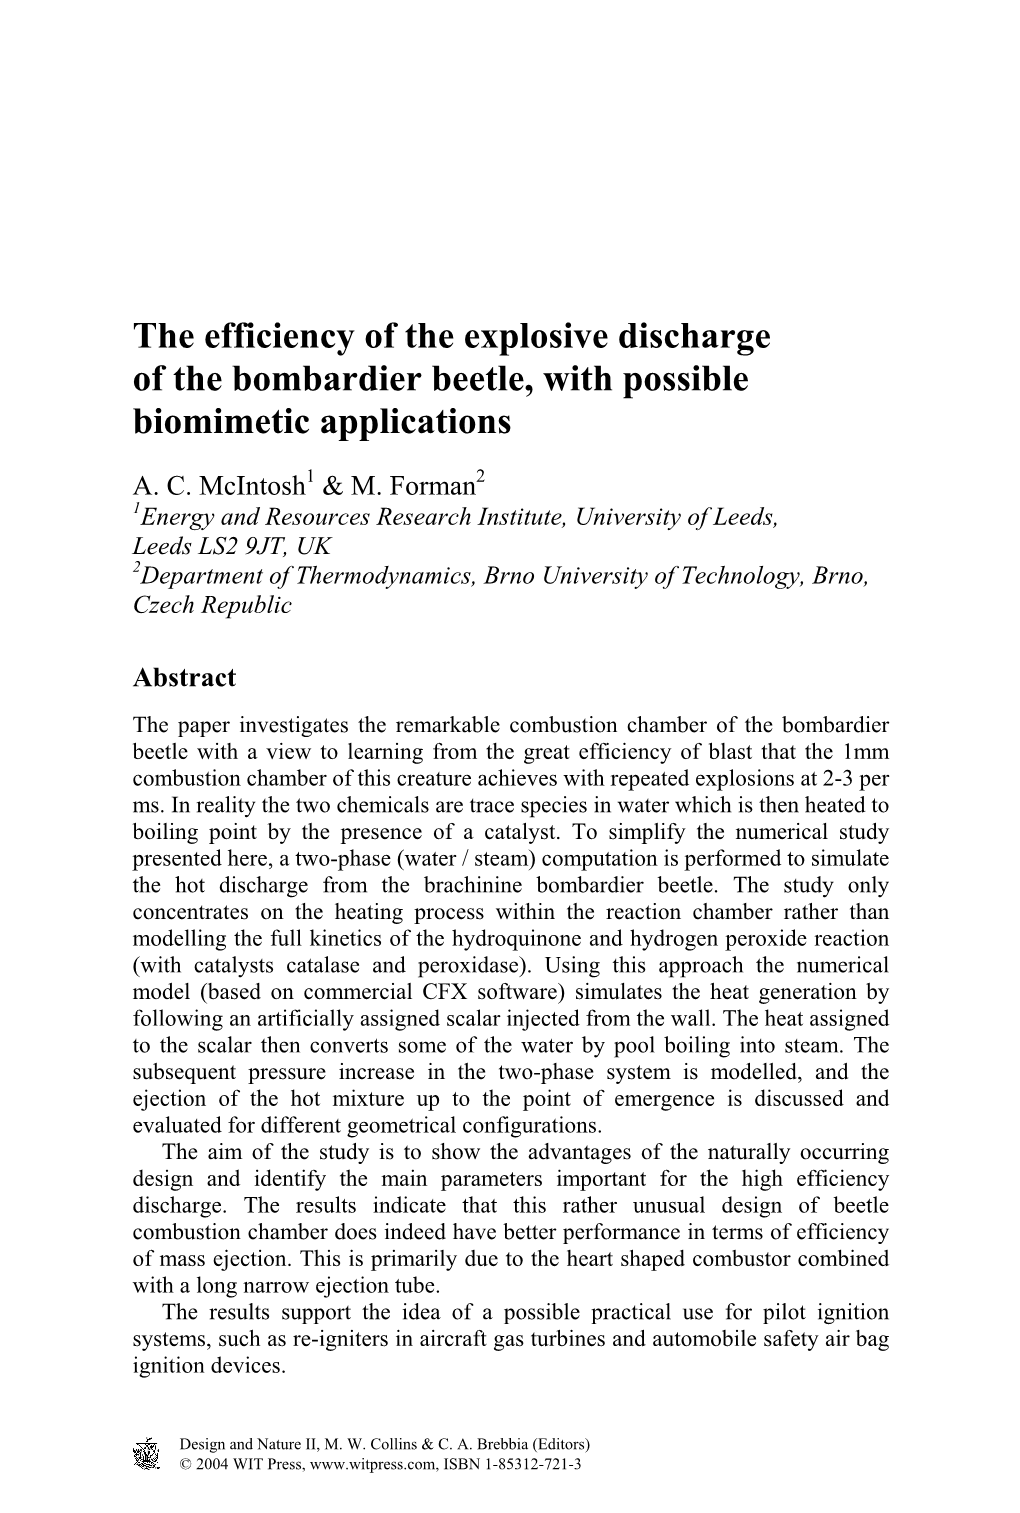 The Efficiency of the Explosive Discharge of the Bombardier Beetle, with Possible Biomimetic Applications